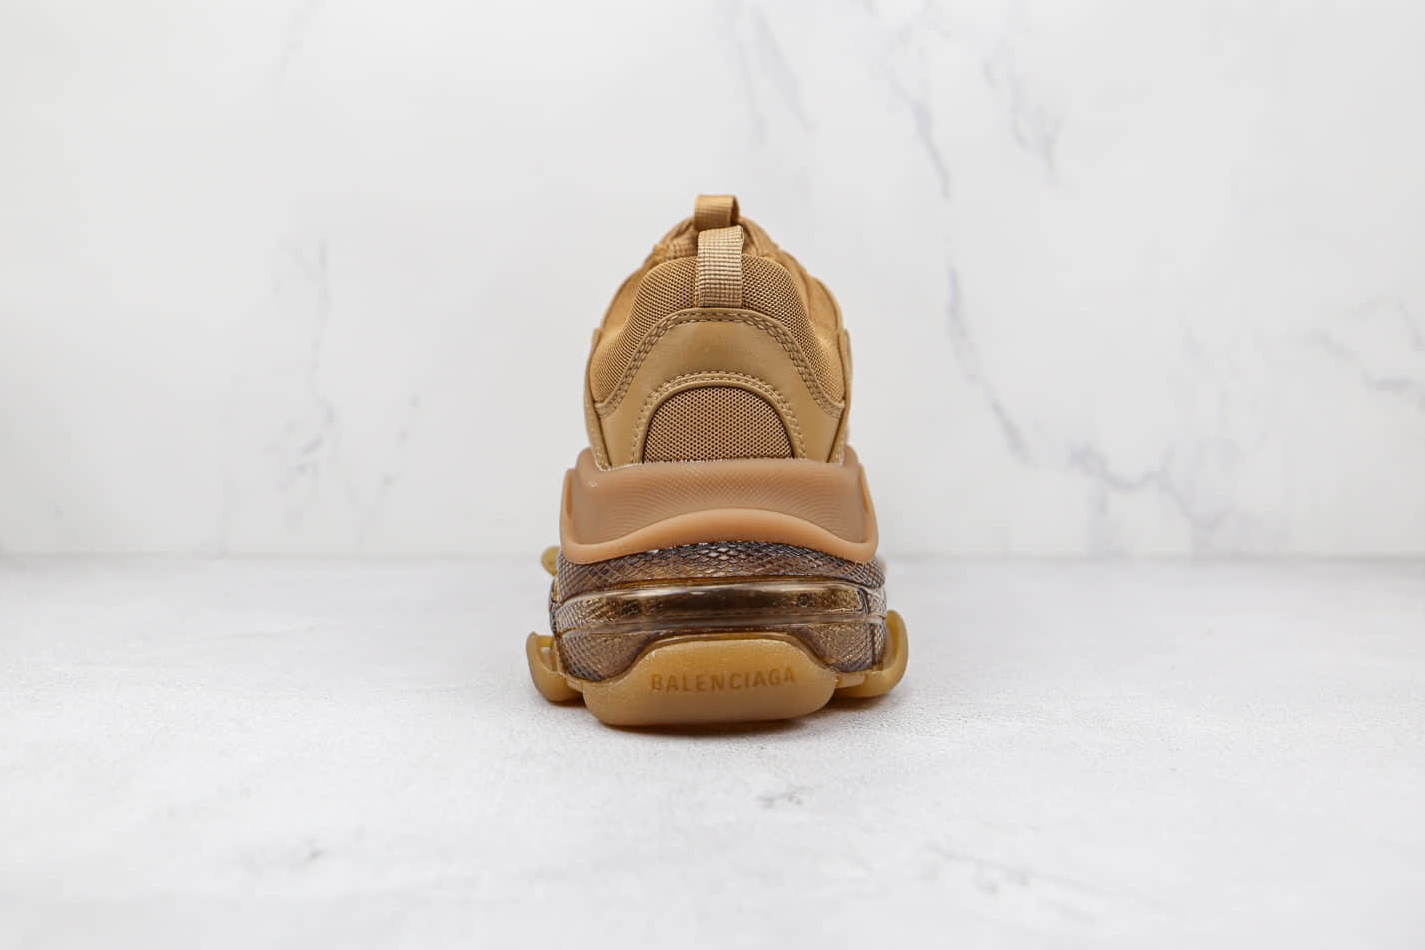 Balenciaga Triple S 'Clear Sole - Light Camel' 544351 W2GA1 2706 - Exquisite Sneakers for the Fashion Forward